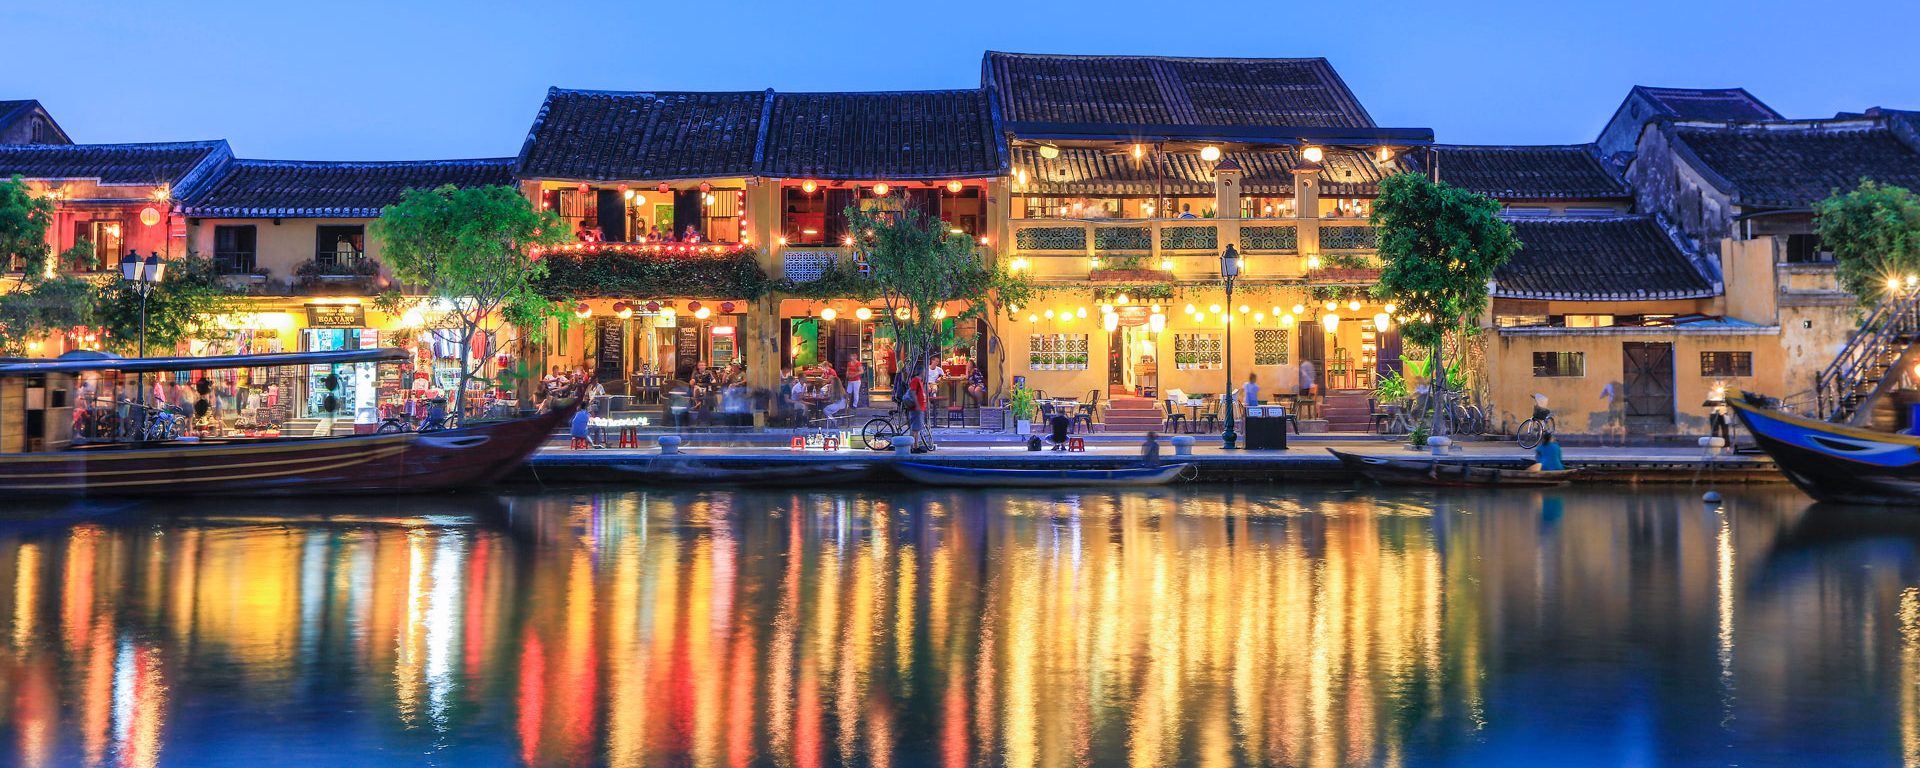 Shops overlooking the river in central Hoi An, Vietnam